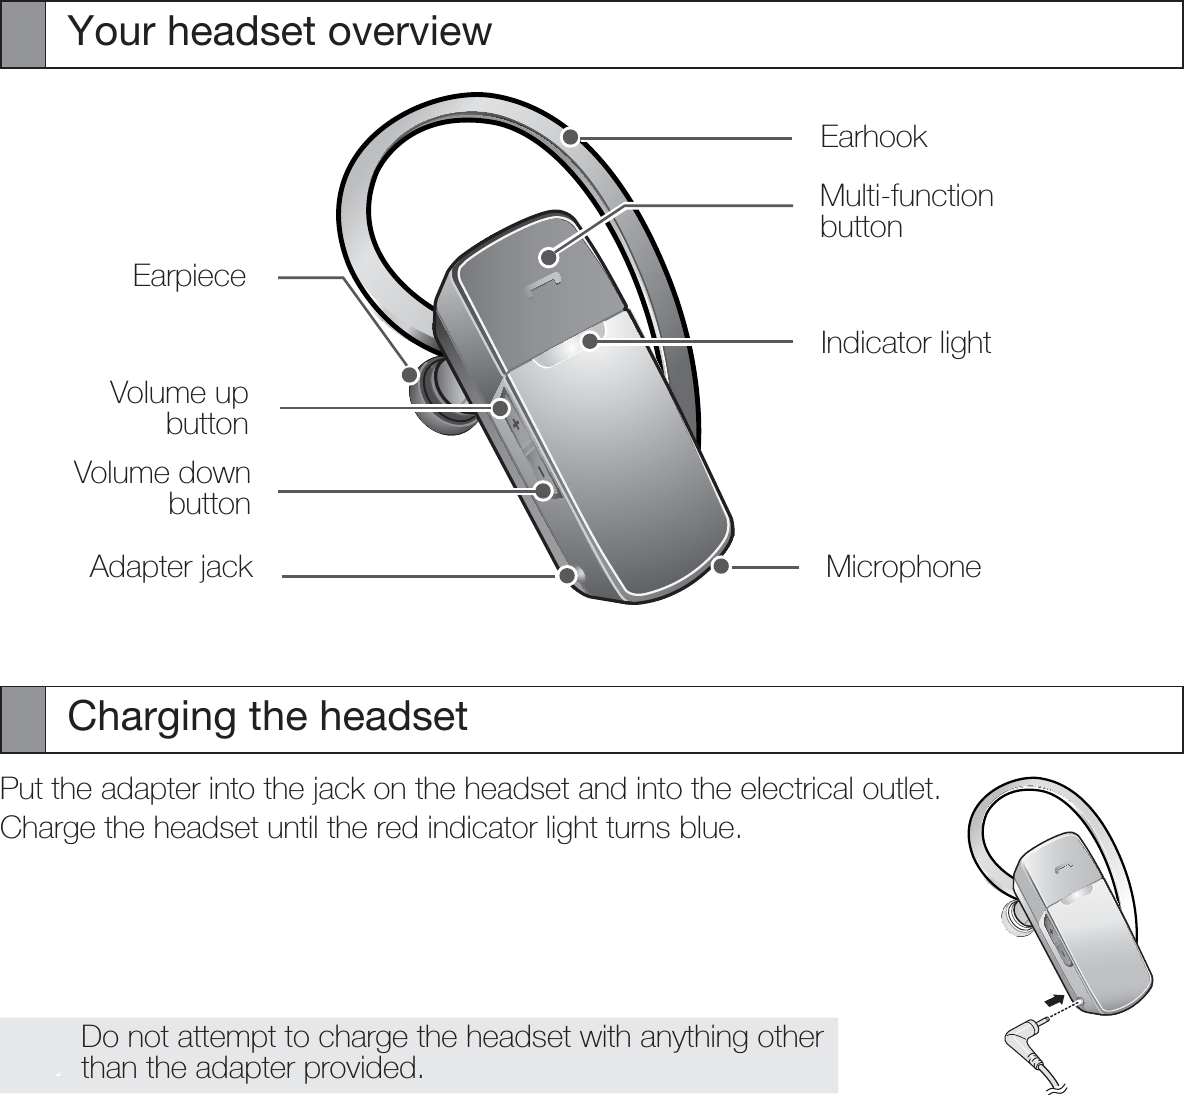 Your headset overviewCharging the headsetPut the adapter into the jack on the headset and into the electrical outlet.Charge the headset until the red indicator light turns blue.Do not attempt to charge the headset with anything other than the adapter provided.Volume down buttonVolume up buttonIndicator lightMicrophoneEarhookMulti-function buttonAdapter jackEarpiece